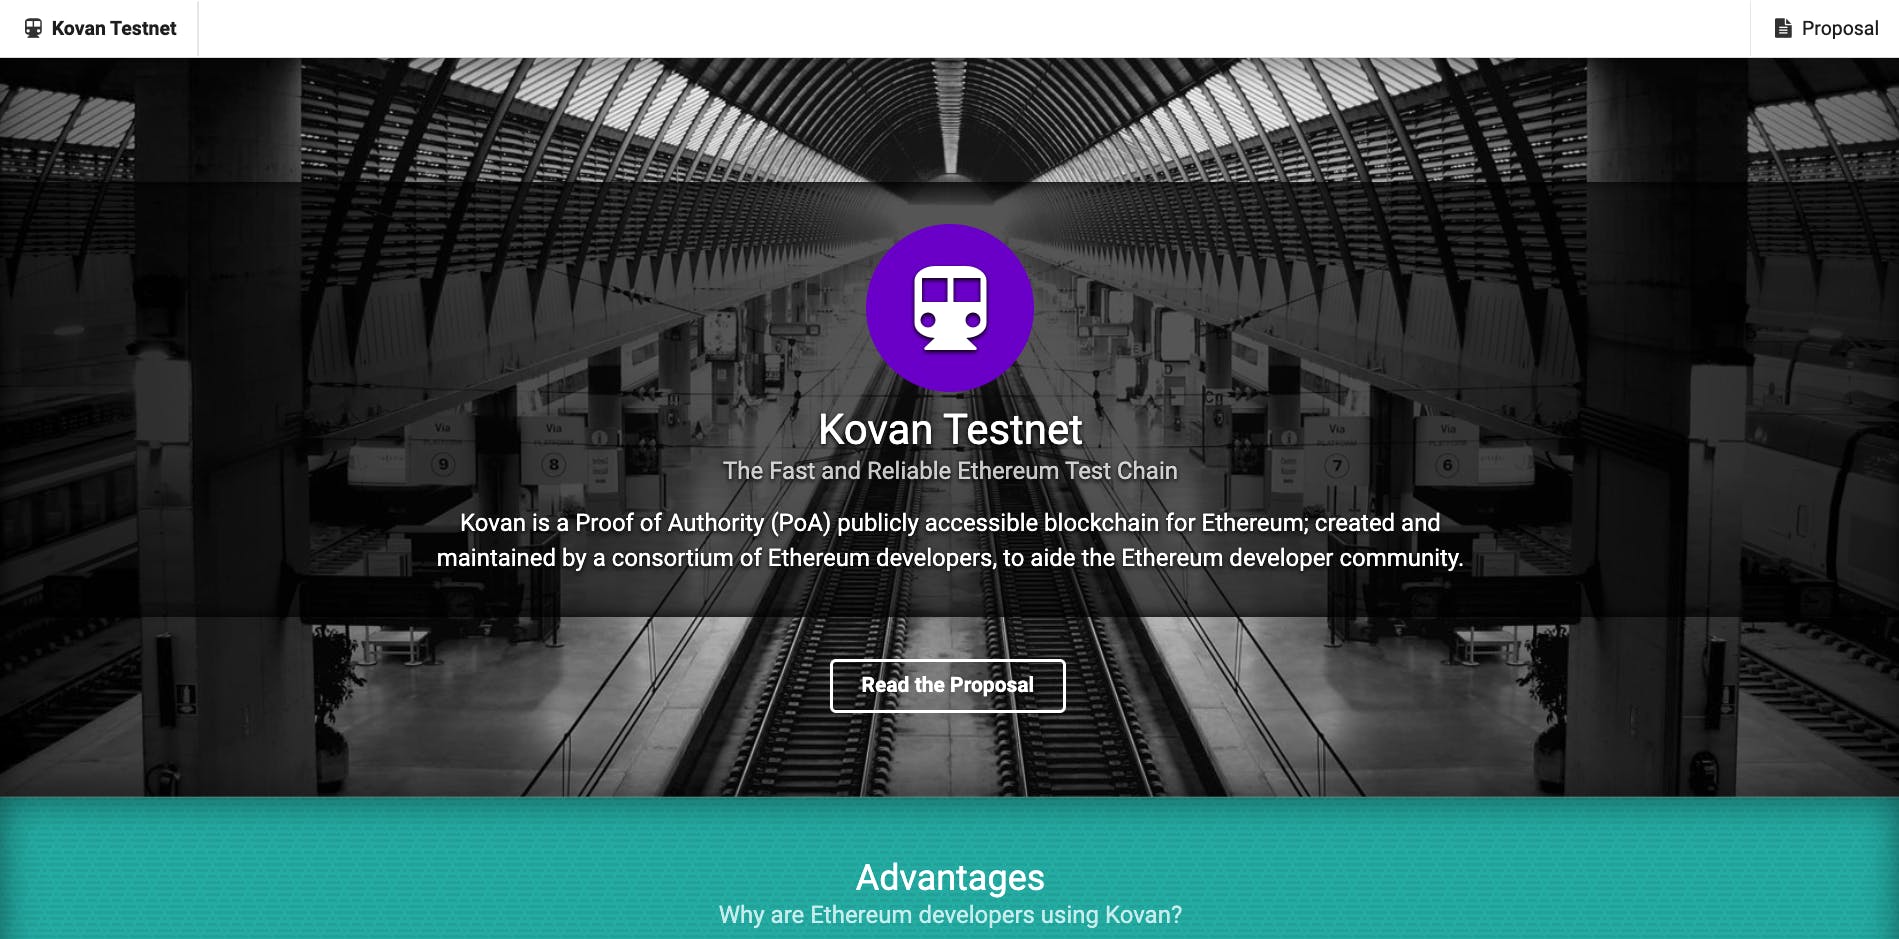 The Kovan test network is a Proof-of-Authority Testnet for Ethereum